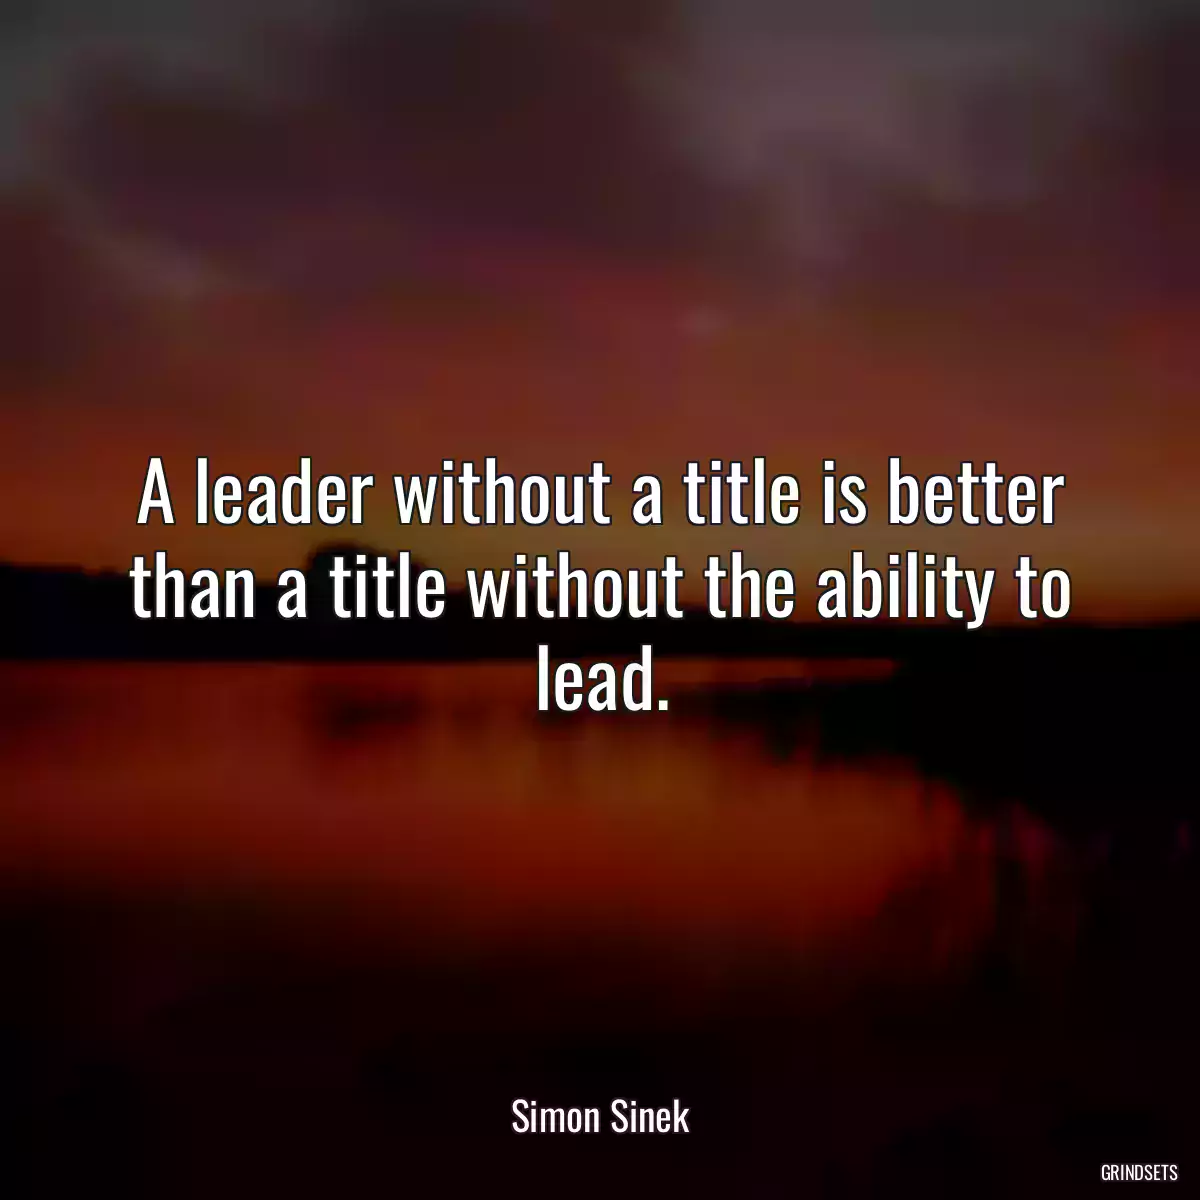 A leader without a title is better than a title without the ability to lead.